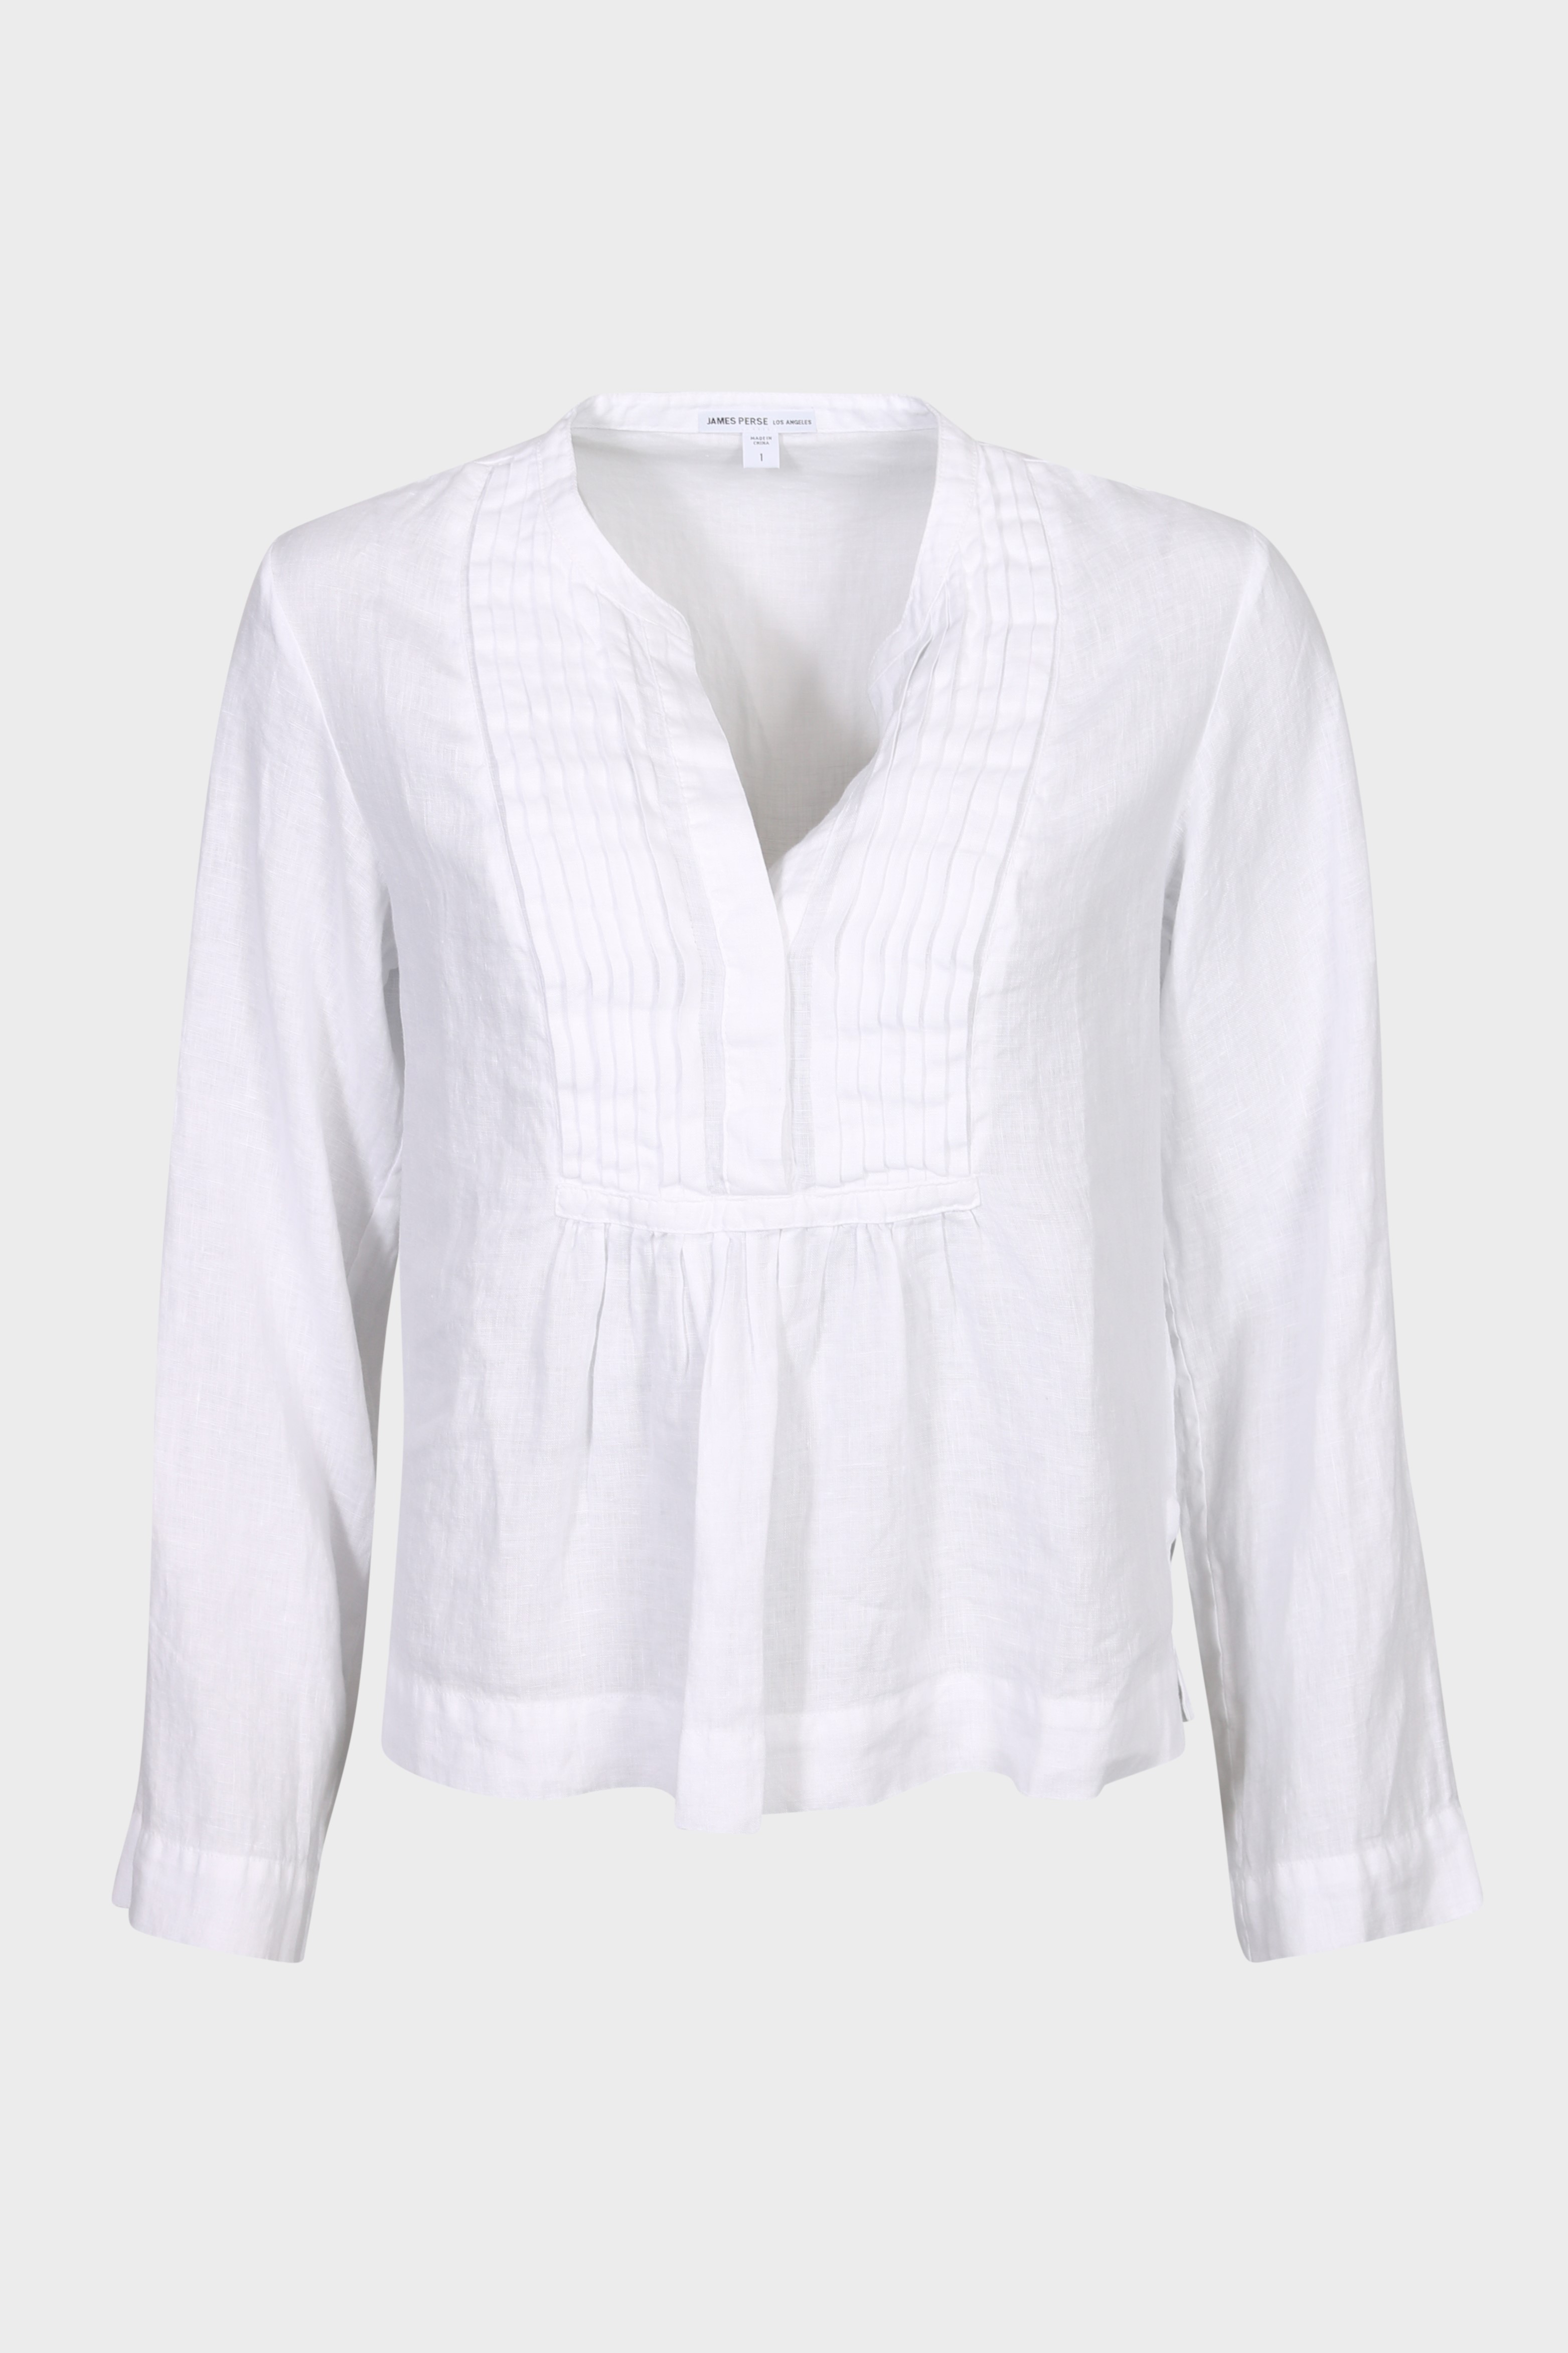 JAMES PERSE Pin Tuck Linen Blouse in White